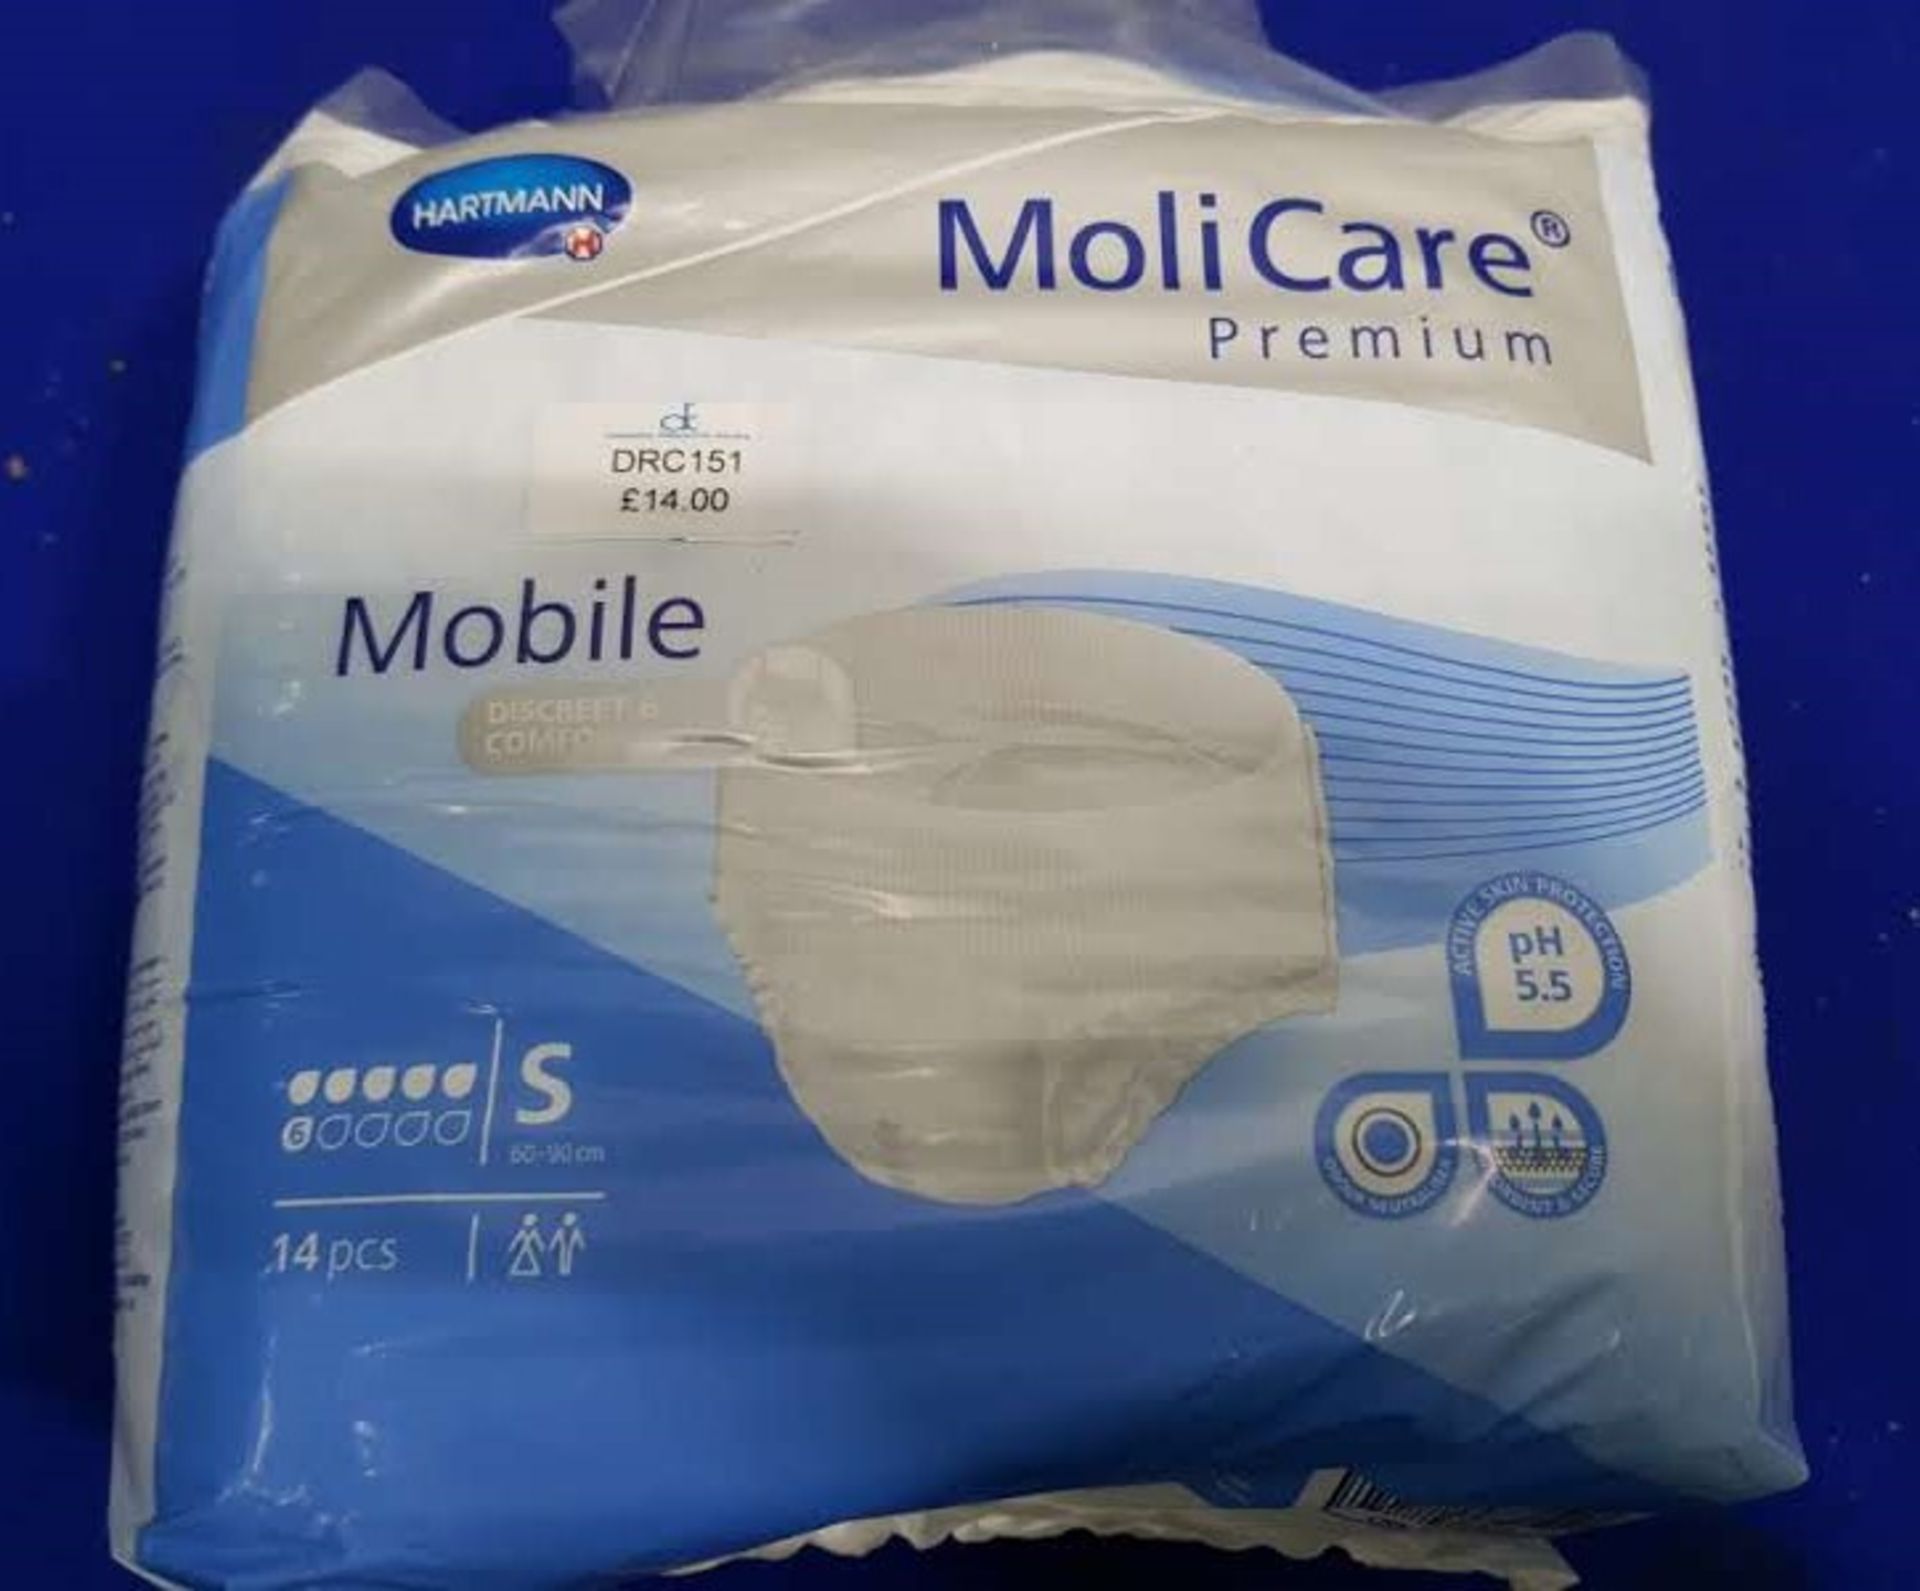 3x Packs Molicare Absorbent Incontinence Pants - Image 2 of 3